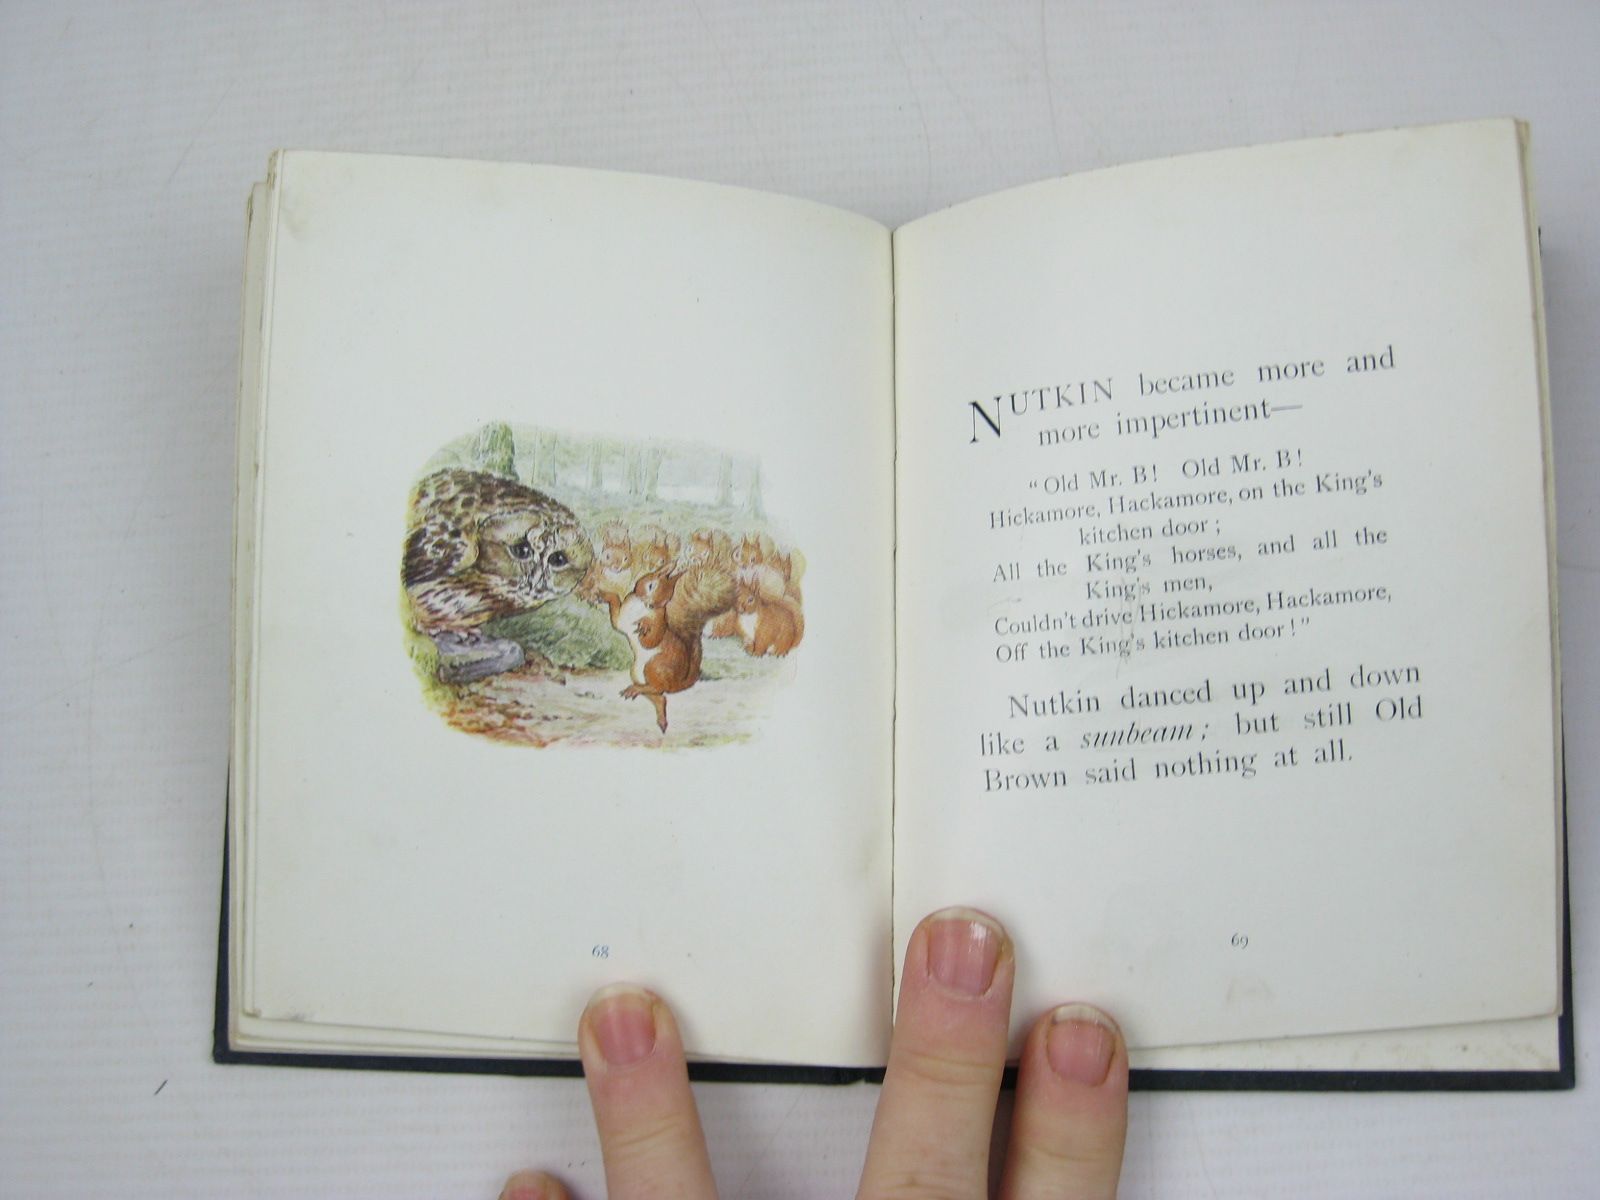 Photo of THE TALE OF SQUIRREL NUTKIN written by Potter, Beatrix illustrated by Potter, Beatrix published by Frederick Warne & Co. (STOCK CODE: 1312249)  for sale by Stella & Rose's Books